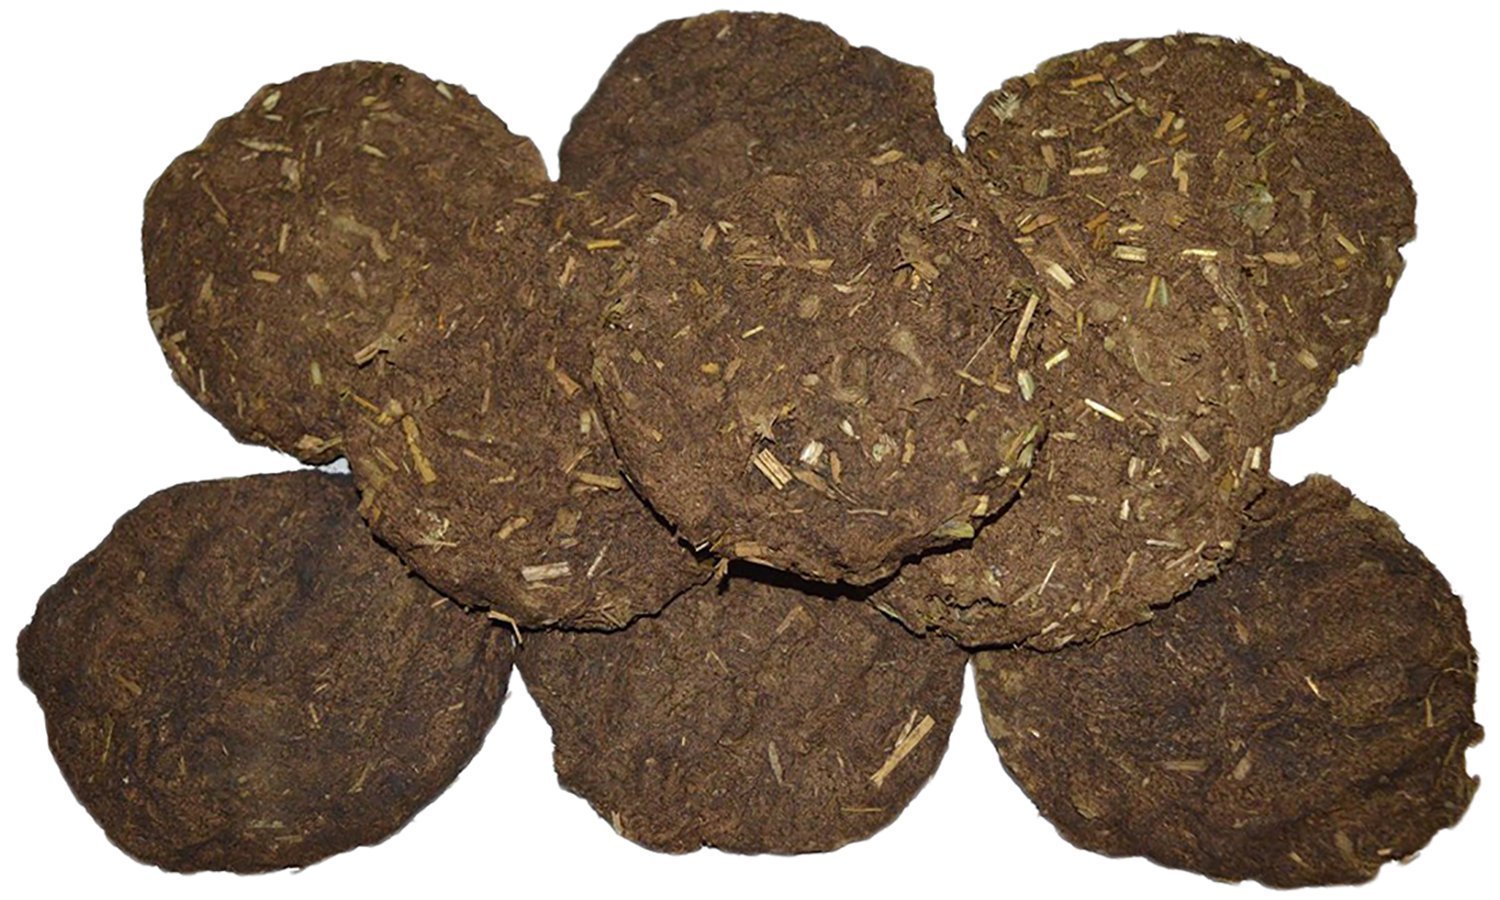 Varatti - dry cow dung cakes (10 pieces)